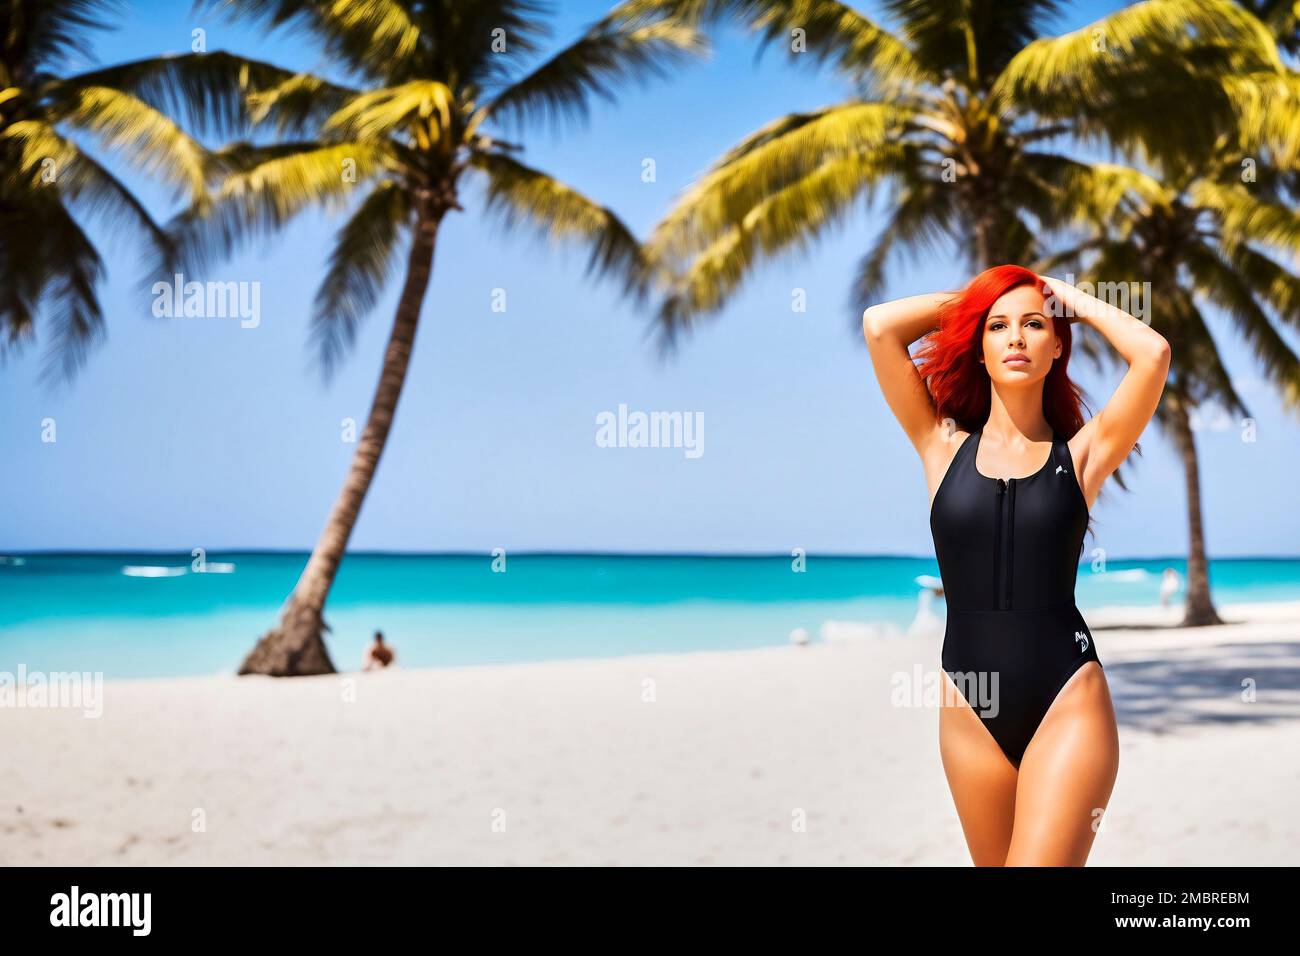 Serious looking young redhead woman in black bathing suit crossed her hands behind her head with shaved armpits on a beach, fictional person, made wit Stock Photo